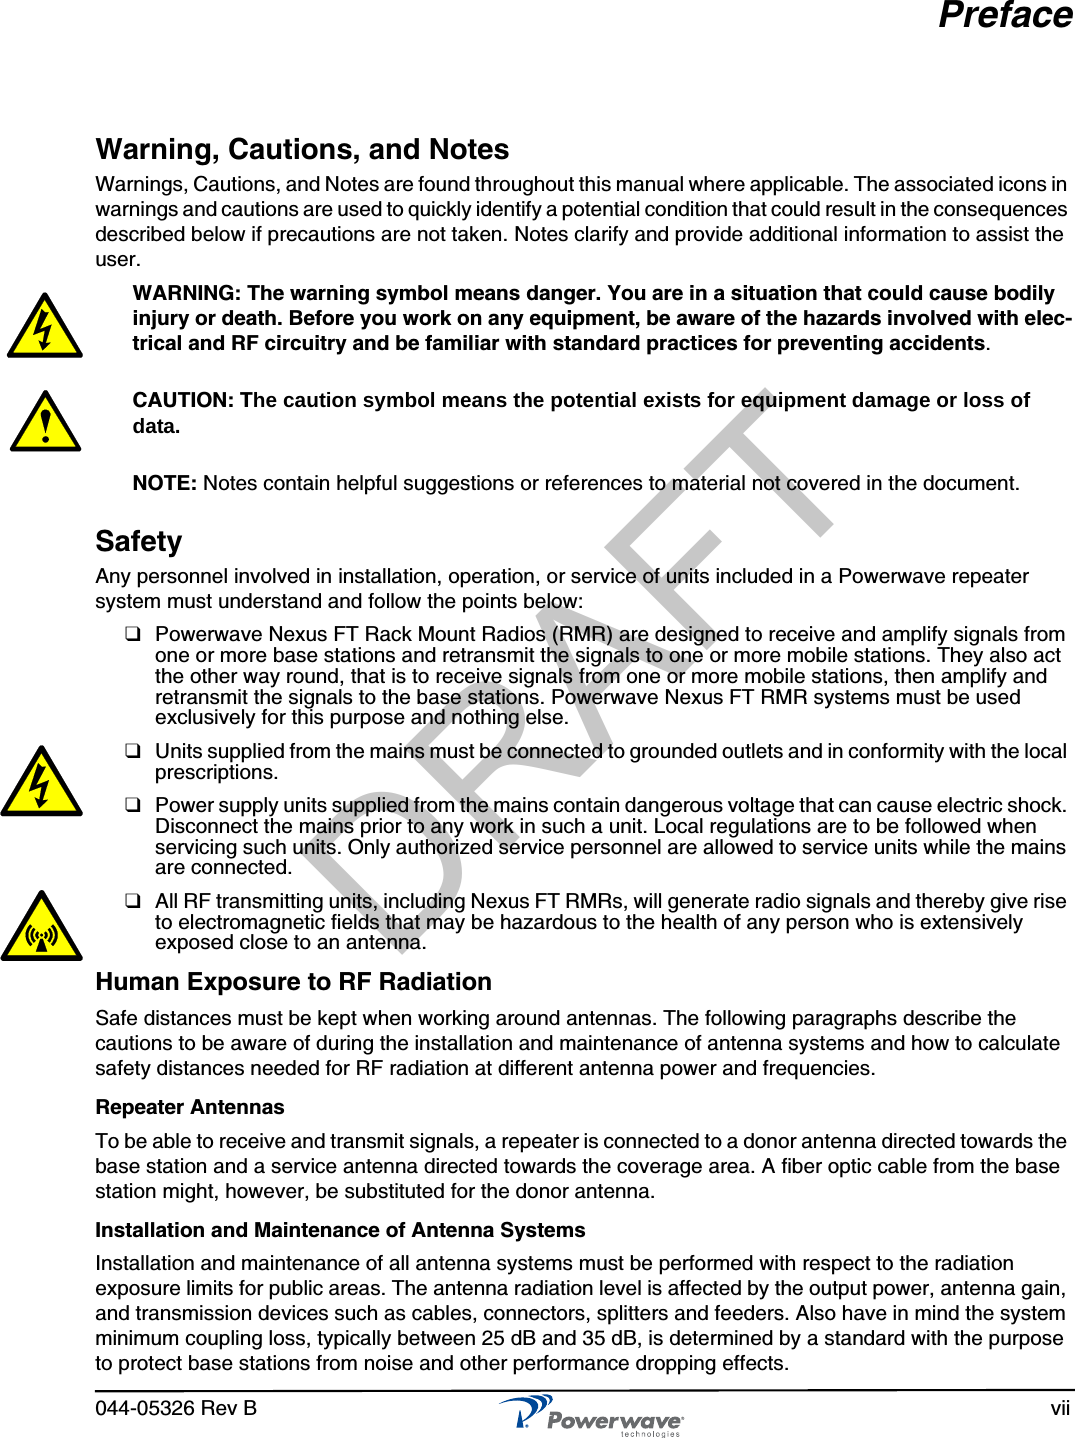 044-05326 Rev B viiPrefaceWarning, Cautions, and NotesWarnings, Cautions, and Notes are found throughout this manual where applicable. The associated icons in warnings and cautions are used to quickly identify a potential condition that could result in the consequences described below if precautions are not taken. Notes clarify and provide additional information to assist the user.WARNING: The warning symbol means danger. You are in a situation that could cause bodily injury or death. Before you work on any equipment, be aware of the hazards involved with elec-trical and RF circuitry and be familiar with standard practices for preventing accidents.CAUTION: The caution symbol means the potential exists for equipment damage or loss of data.NOTE: Notes contain helpful suggestions or references to material not covered in the document.SafetyAny personnel involved in installation, operation, or service of units included in a Powerwave repeater system must understand and follow the points below:❑Powerwave Nexus FT Rack Mount Radios (RMR) are designed to receive and amplify signals from one or more base stations and retransmit the signals to one or more mobile stations. They also act the other way round, that is to receive signals from one or more mobile stations, then amplify and retransmit the signals to the base stations. Powerwave Nexus FT RMR systems must be used exclusively for this purpose and nothing else.❑Units supplied from the mains must be connected to grounded outlets and in conformity with the local prescriptions.❑Power supply units supplied from the mains contain dangerous voltage that can cause electric shock. Disconnect the mains prior to any work in such a unit. Local regulations are to be followed when servicing such units. Only authorized service personnel are allowed to service units while the mains are connected.❑All RF transmitting units, including Nexus FT RMRs, will generate radio signals and thereby give rise to electromagnetic fields that may be hazardous to the health of any person who is extensively exposed close to an antenna.Human Exposure to RF RadiationSafe distances must be kept when working around antennas. The following paragraphs describe the cautions to be aware of during the installation and maintenance of antenna systems and how to calculate safety distances needed for RF radiation at different antenna power and frequencies.Repeater AntennasTo be able to receive and transmit signals, a repeater is connected to a donor antenna directed towards the base station and a service antenna directed towards the coverage area. A fiber optic cable from the base station might, however, be substituted for the donor antenna.Installation and Maintenance of Antenna SystemsInstallation and maintenance of all antenna systems must be performed with respect to the radiation exposure limits for public areas. The antenna radiation level is affected by the output power, antenna gain, and transmission devices such as cables, connectors, splitters and feeders. Also have in mind the system minimum coupling loss, typically between 25 dB and 35 dB, is determined by a standard with the purpose to protect base stations from noise and other performance dropping effects.DRAFT